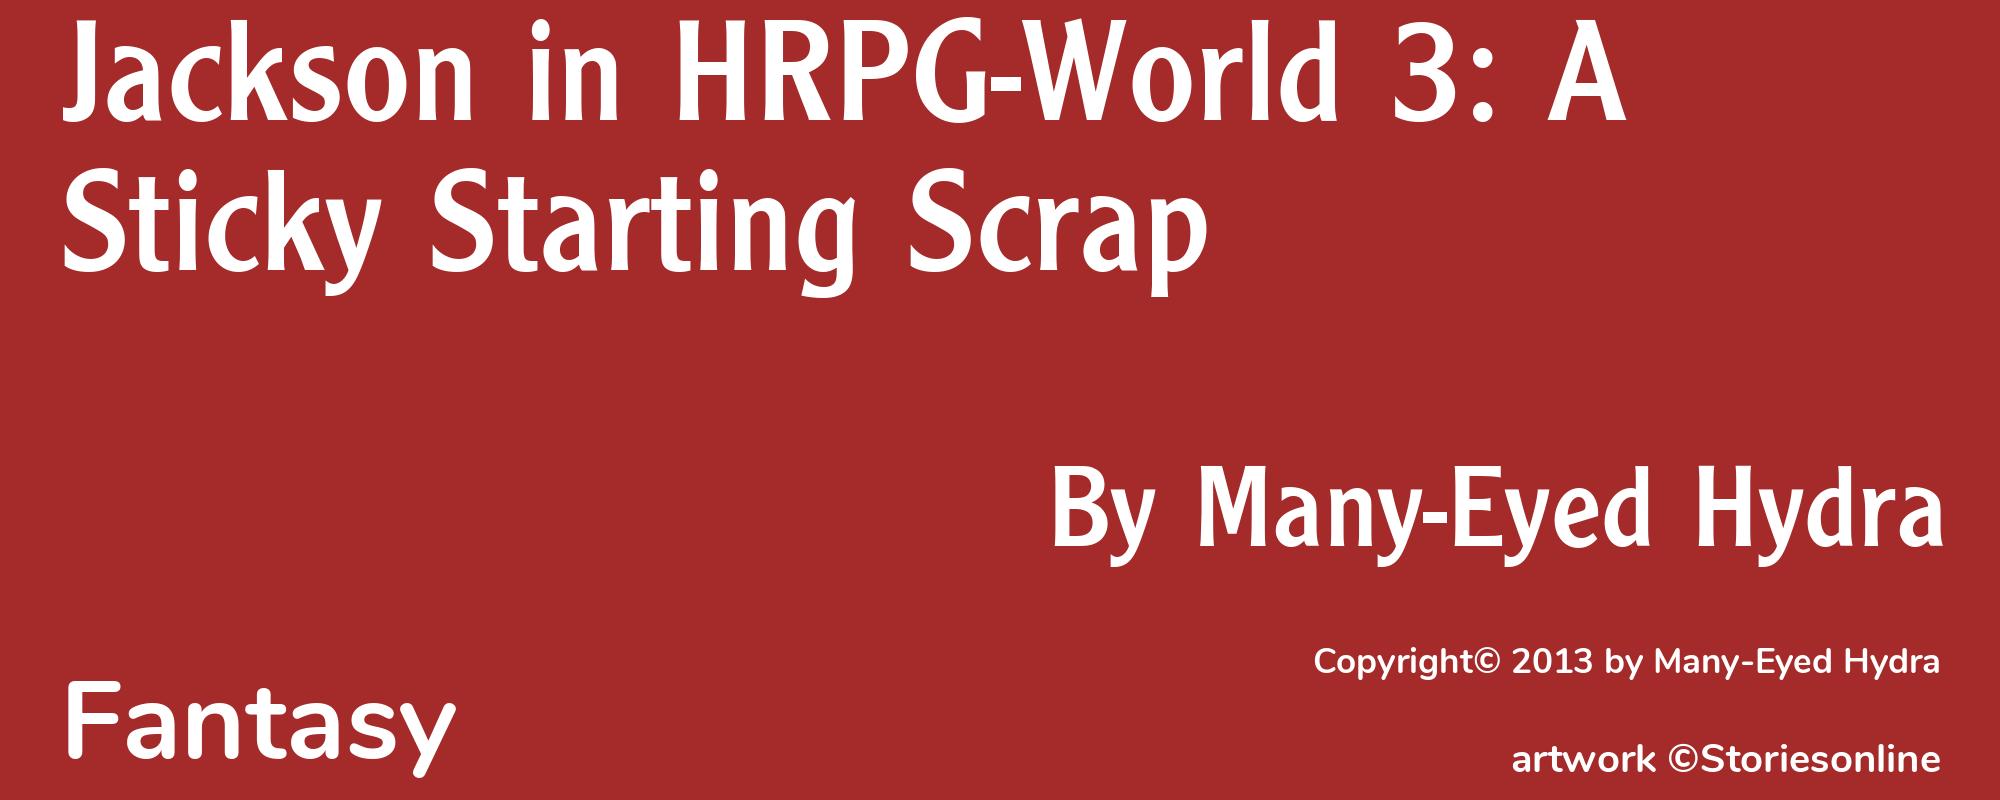 Jackson in HRPG-World 3: A Sticky Starting Scrap - Cover